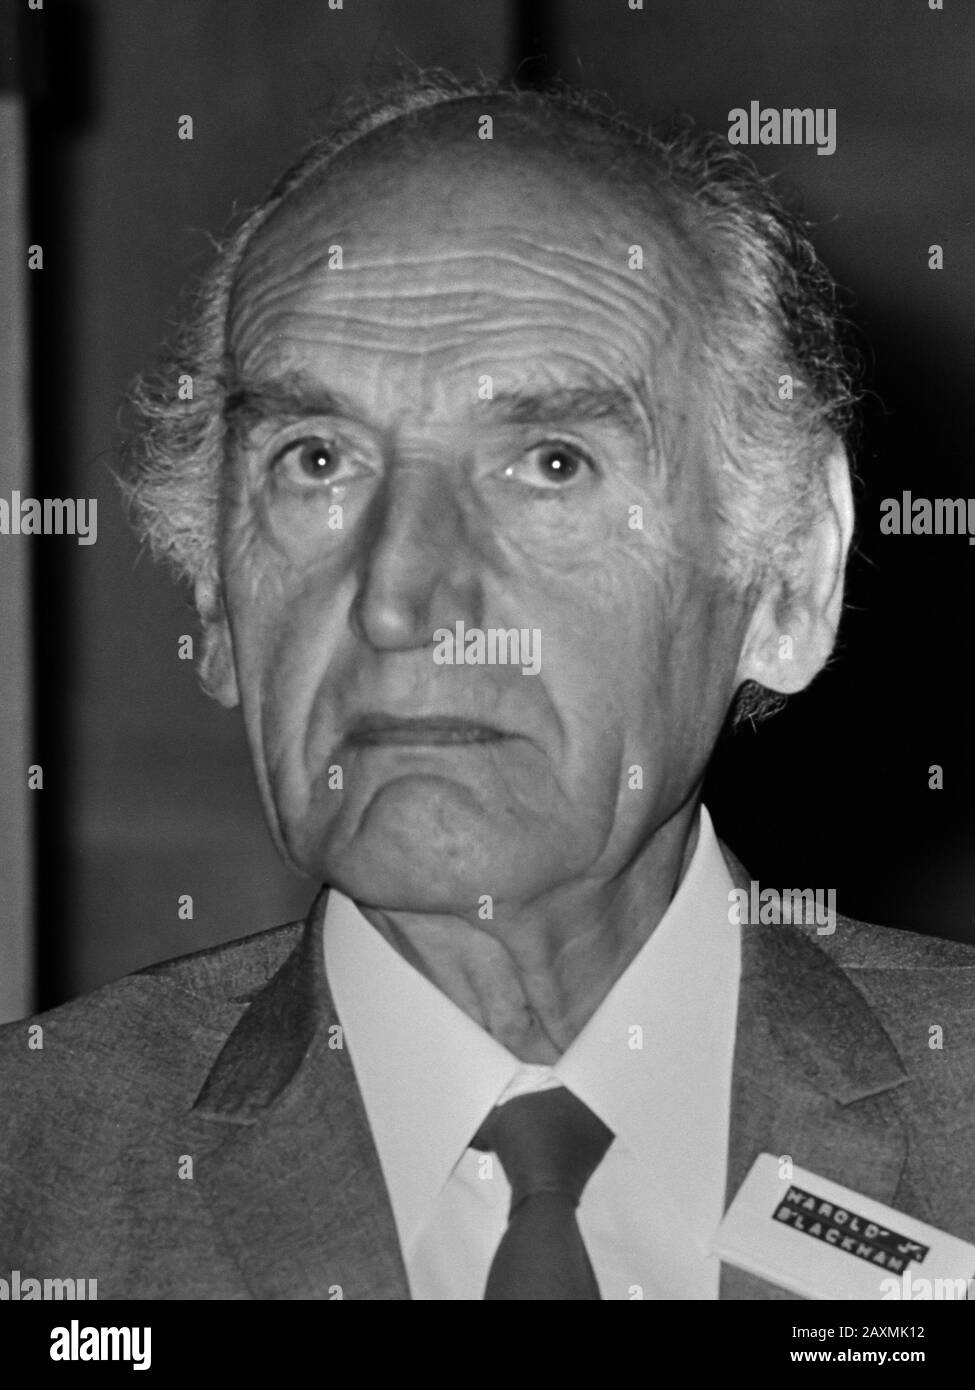 Congress Int.Humanist and Ethical Union at Vrije Universiteit in Amsterdam; mr. Harold Blackham August 6, 1974 Stock Photo